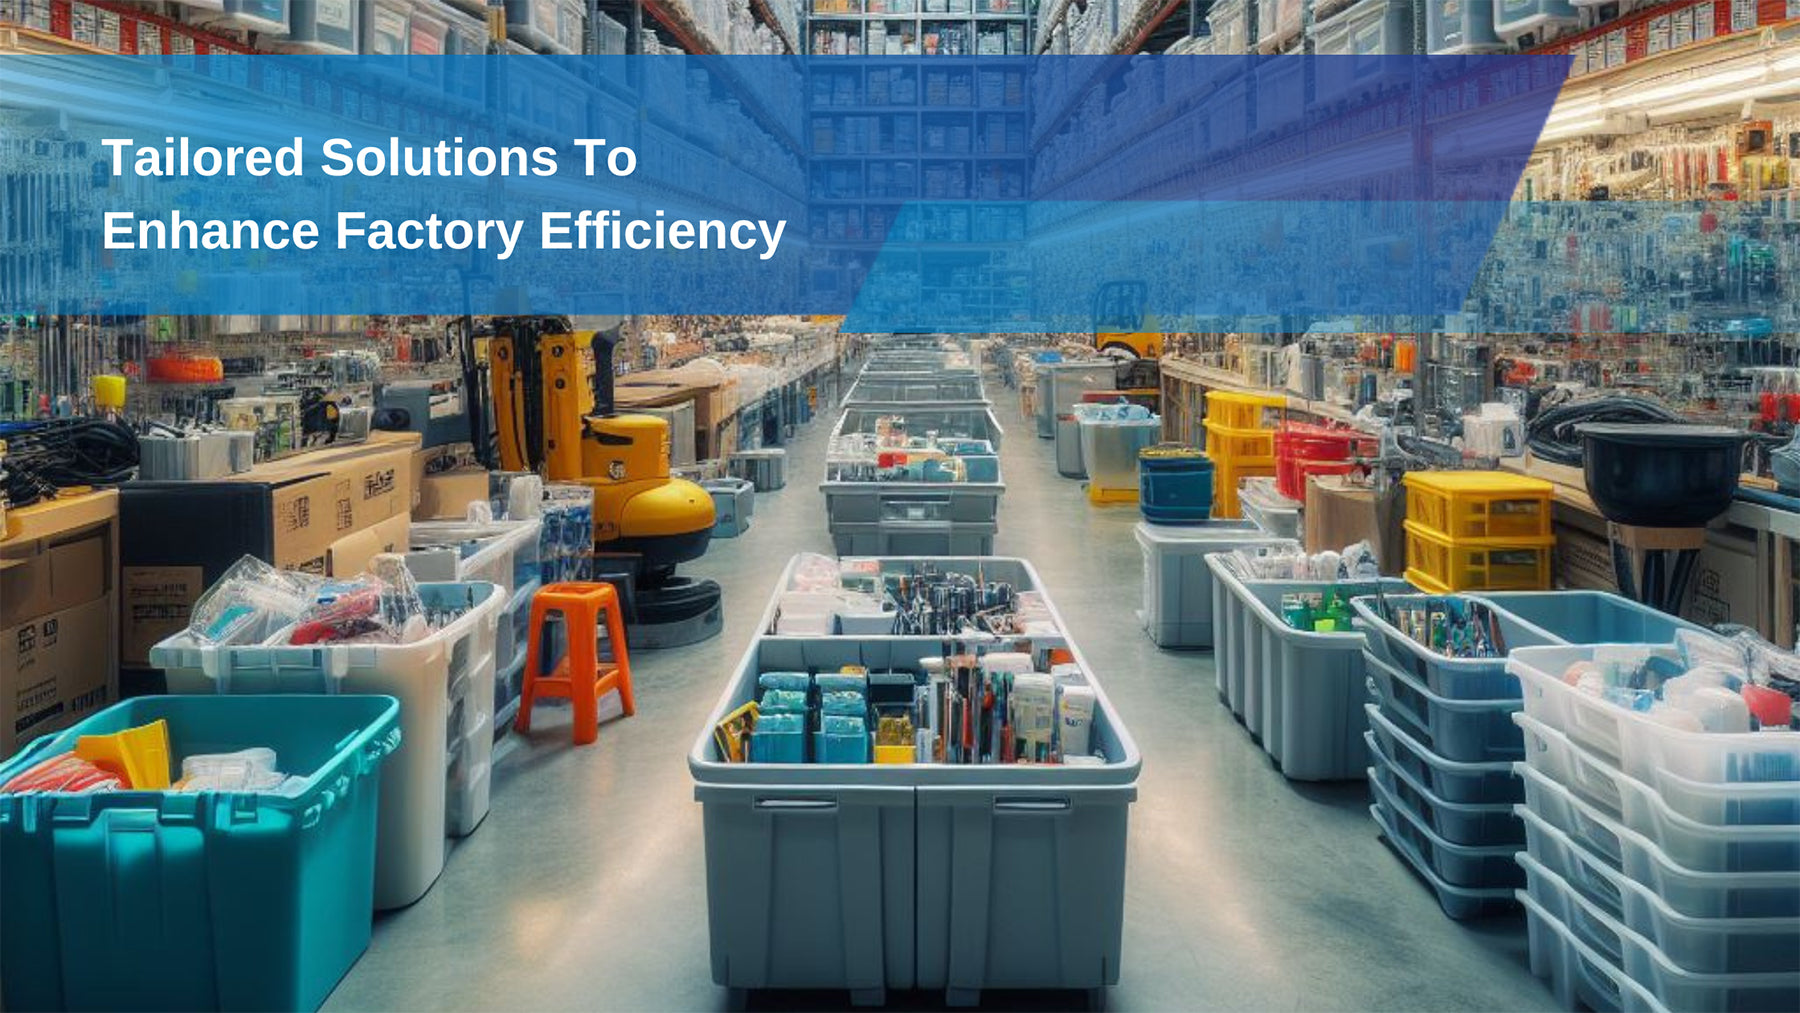 Tailored Solutions to Enhance Factory Efficiency